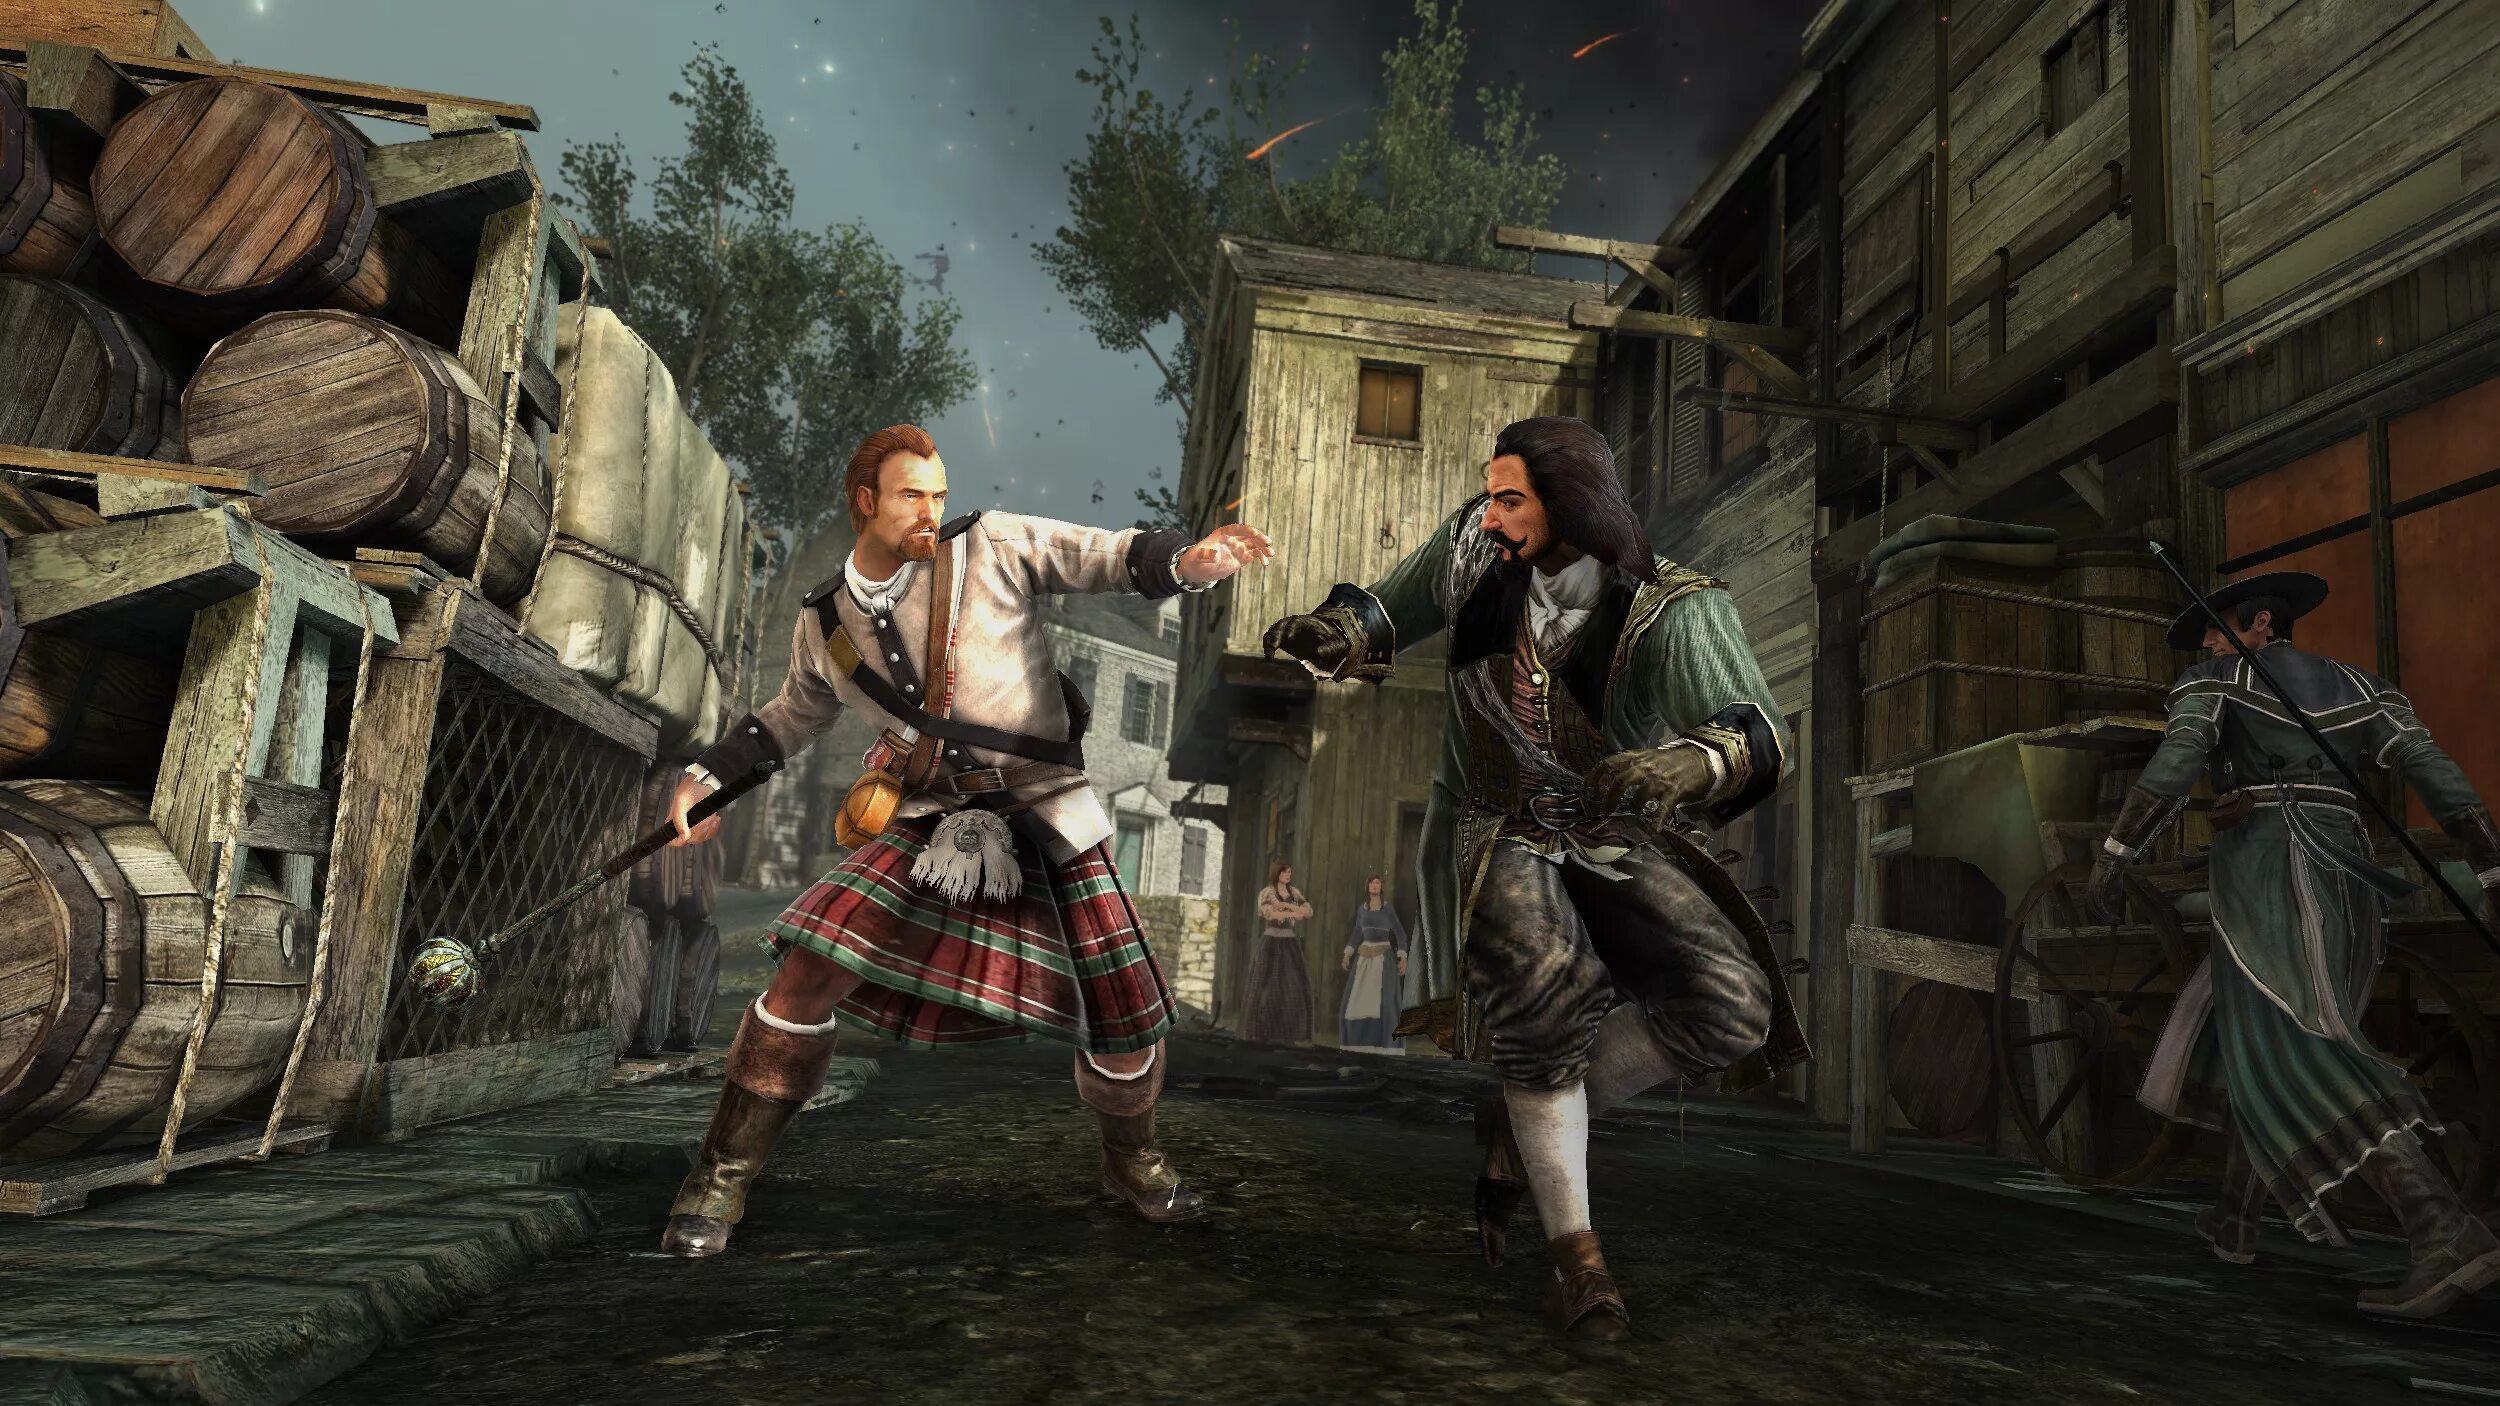 Assassin's Creed. Ассасин Крид 3. Assassin's Creed III: Battle hardened Pack. Assassin's Creed 3 screenshots.